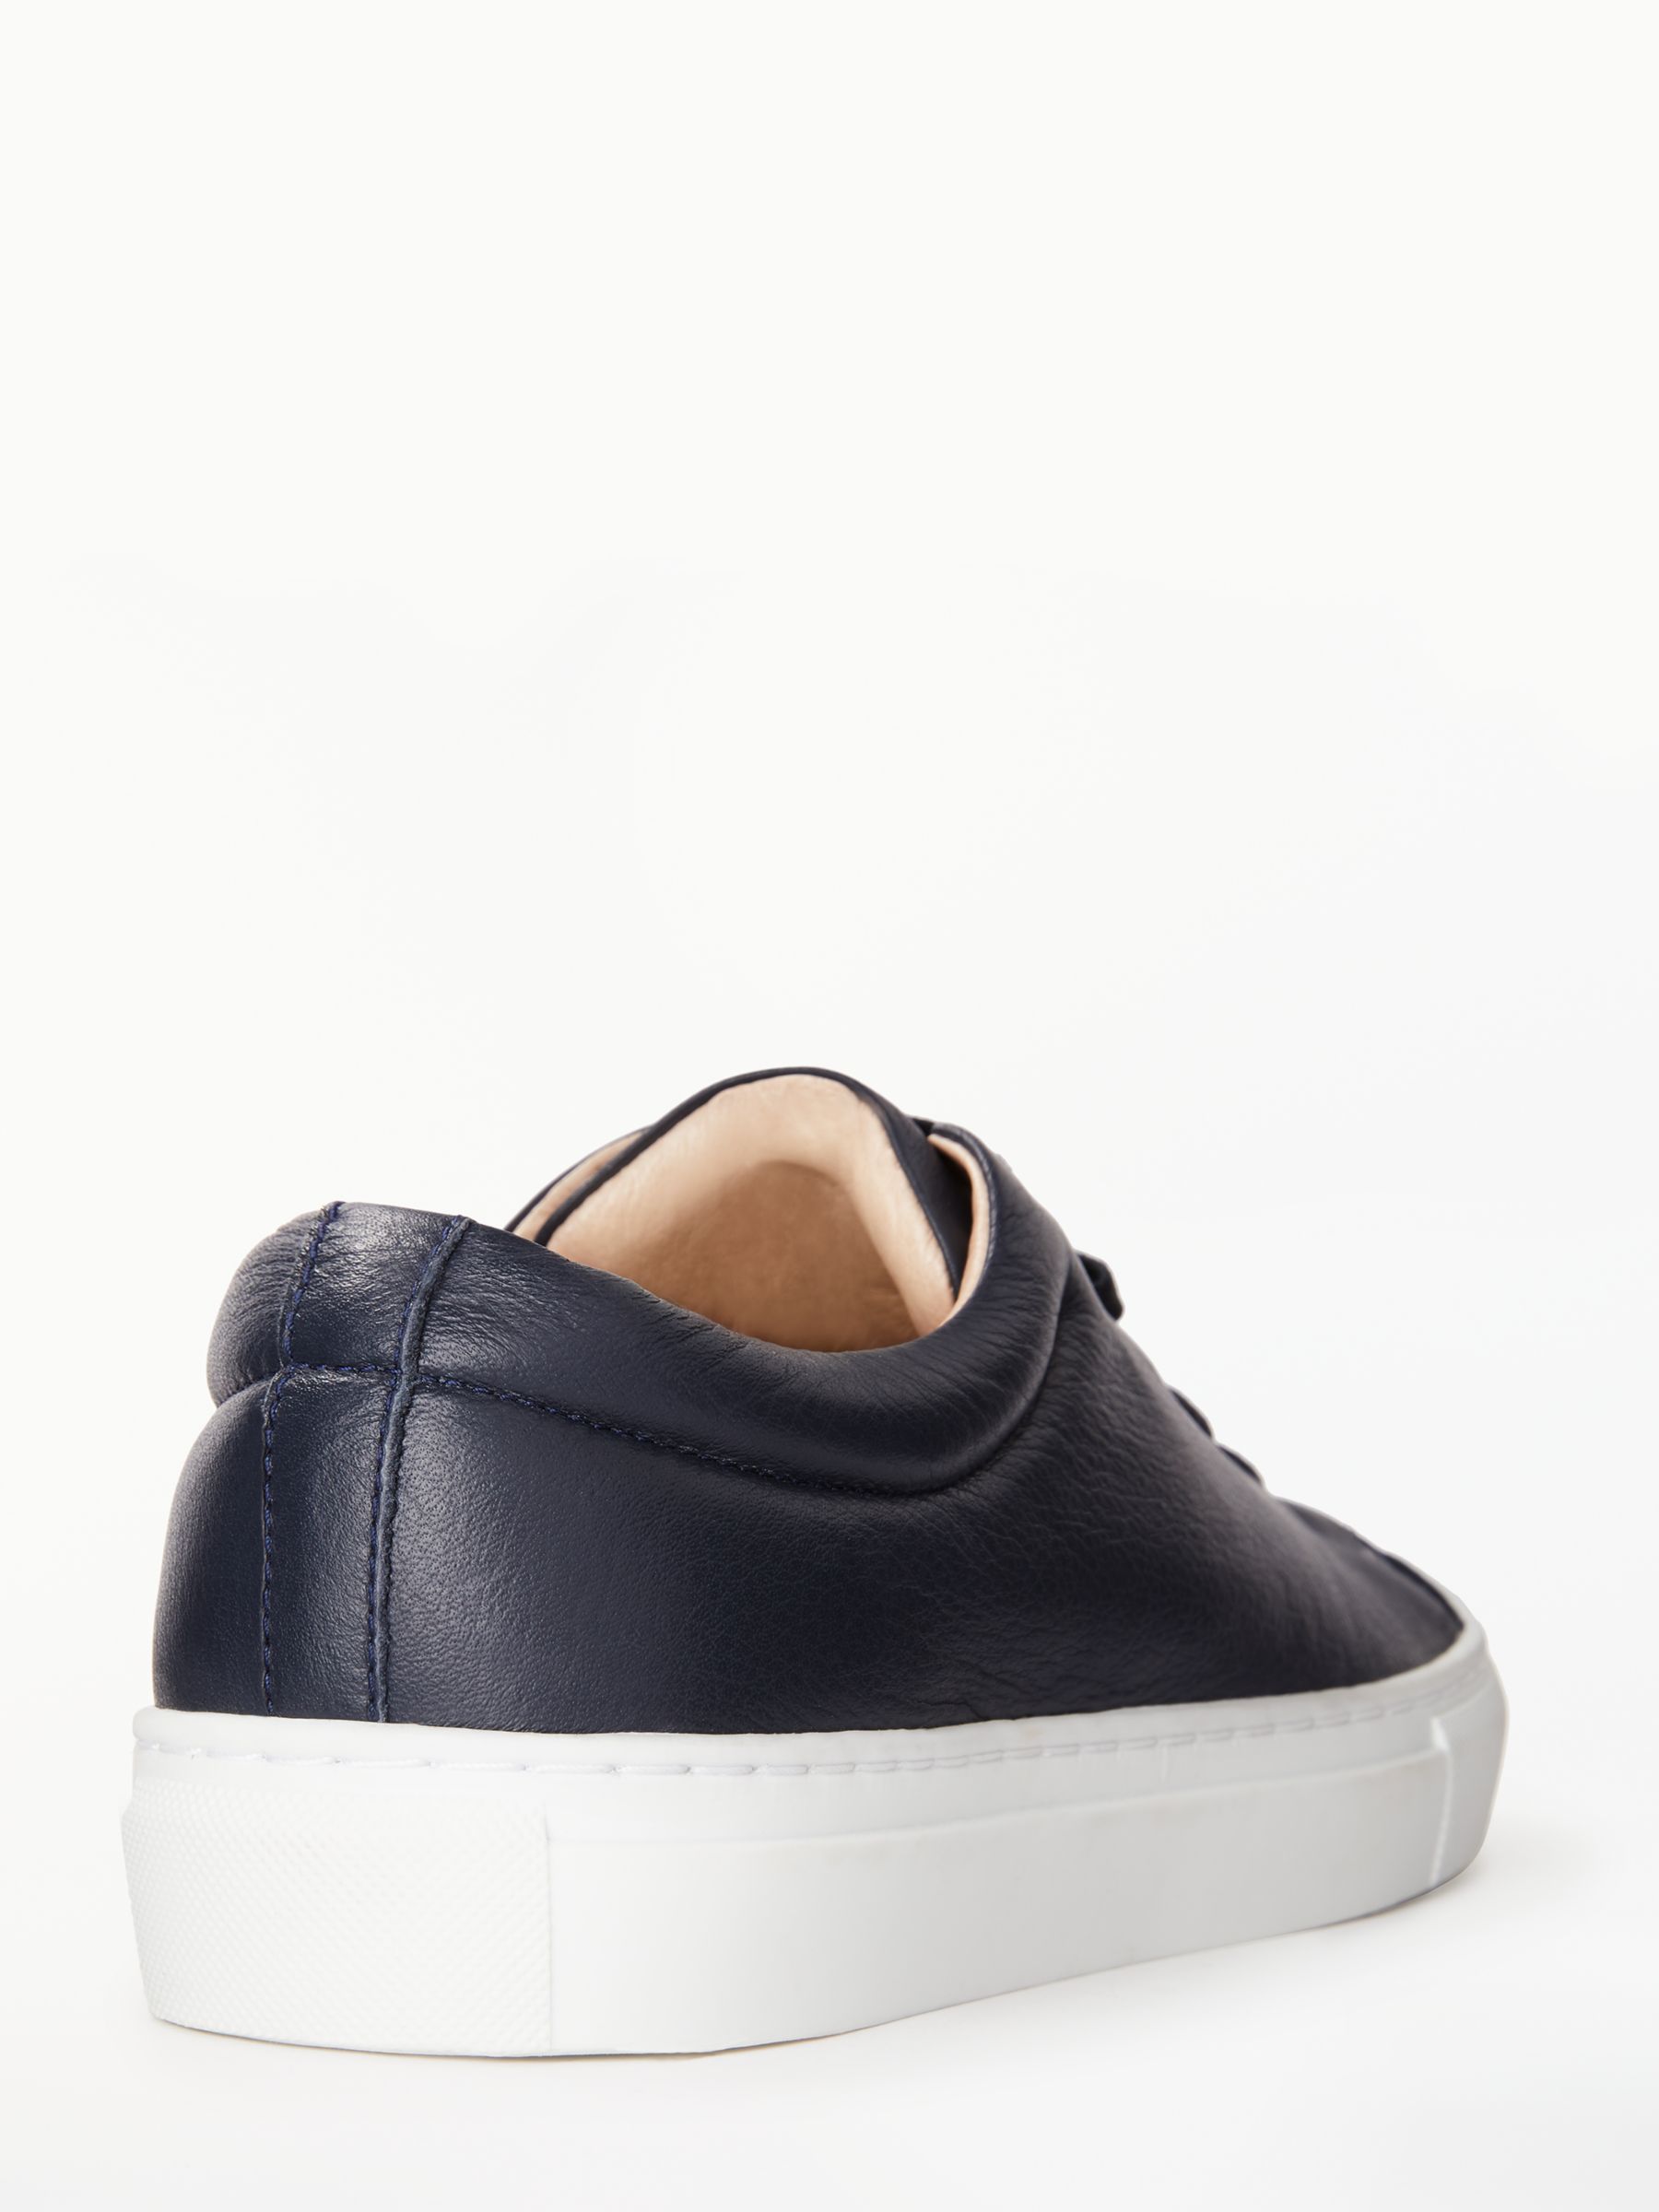 Buy John Lewis Flora Lace Up Trainers Online at johnlewis.com